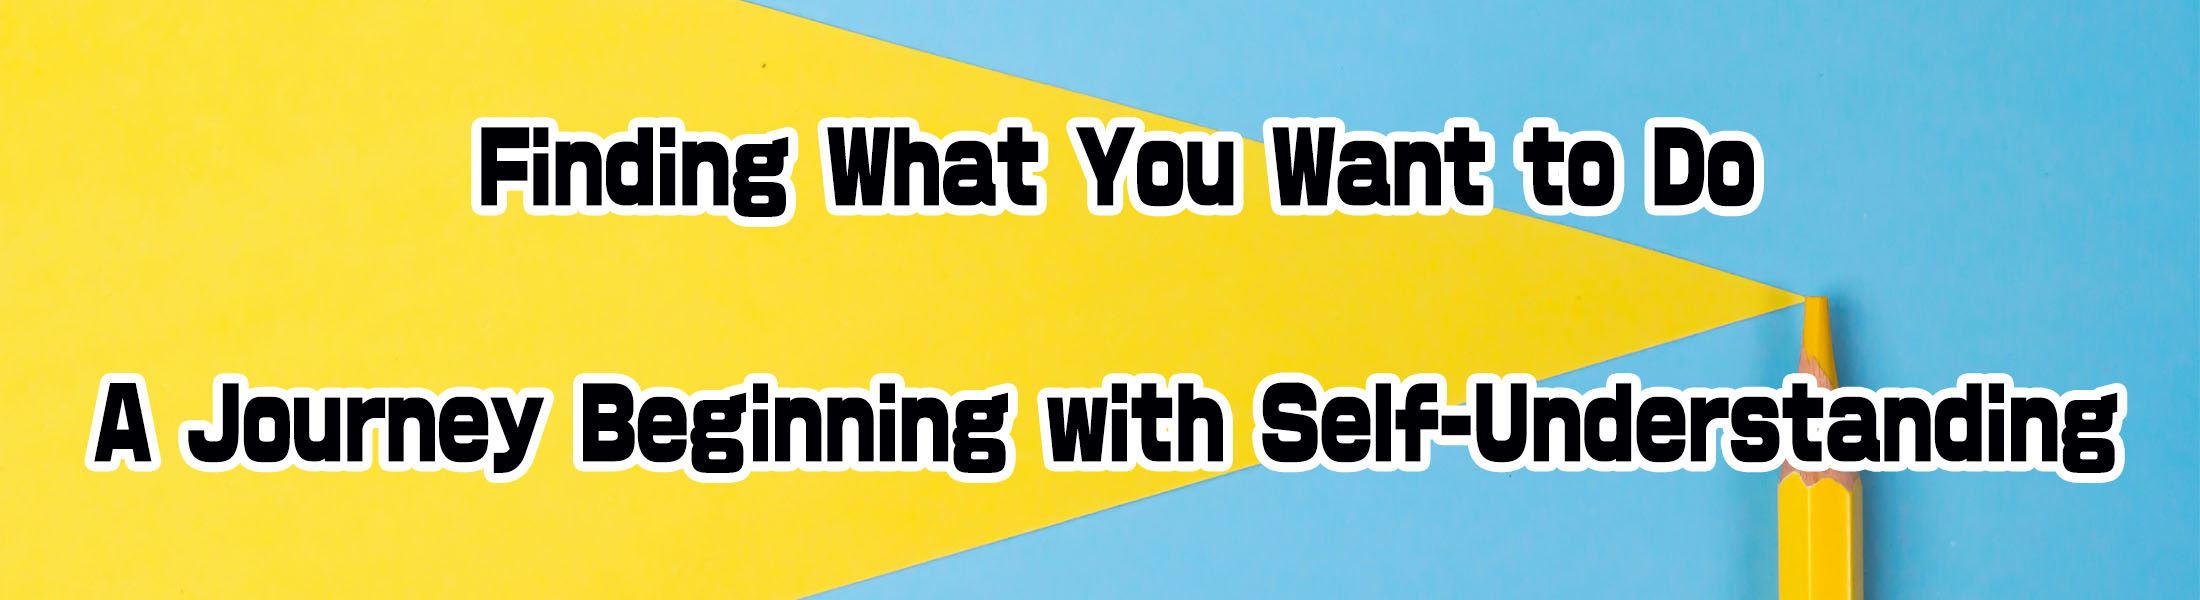 Finding What You Want to Do: A Journey Beginning with Self-Understanding